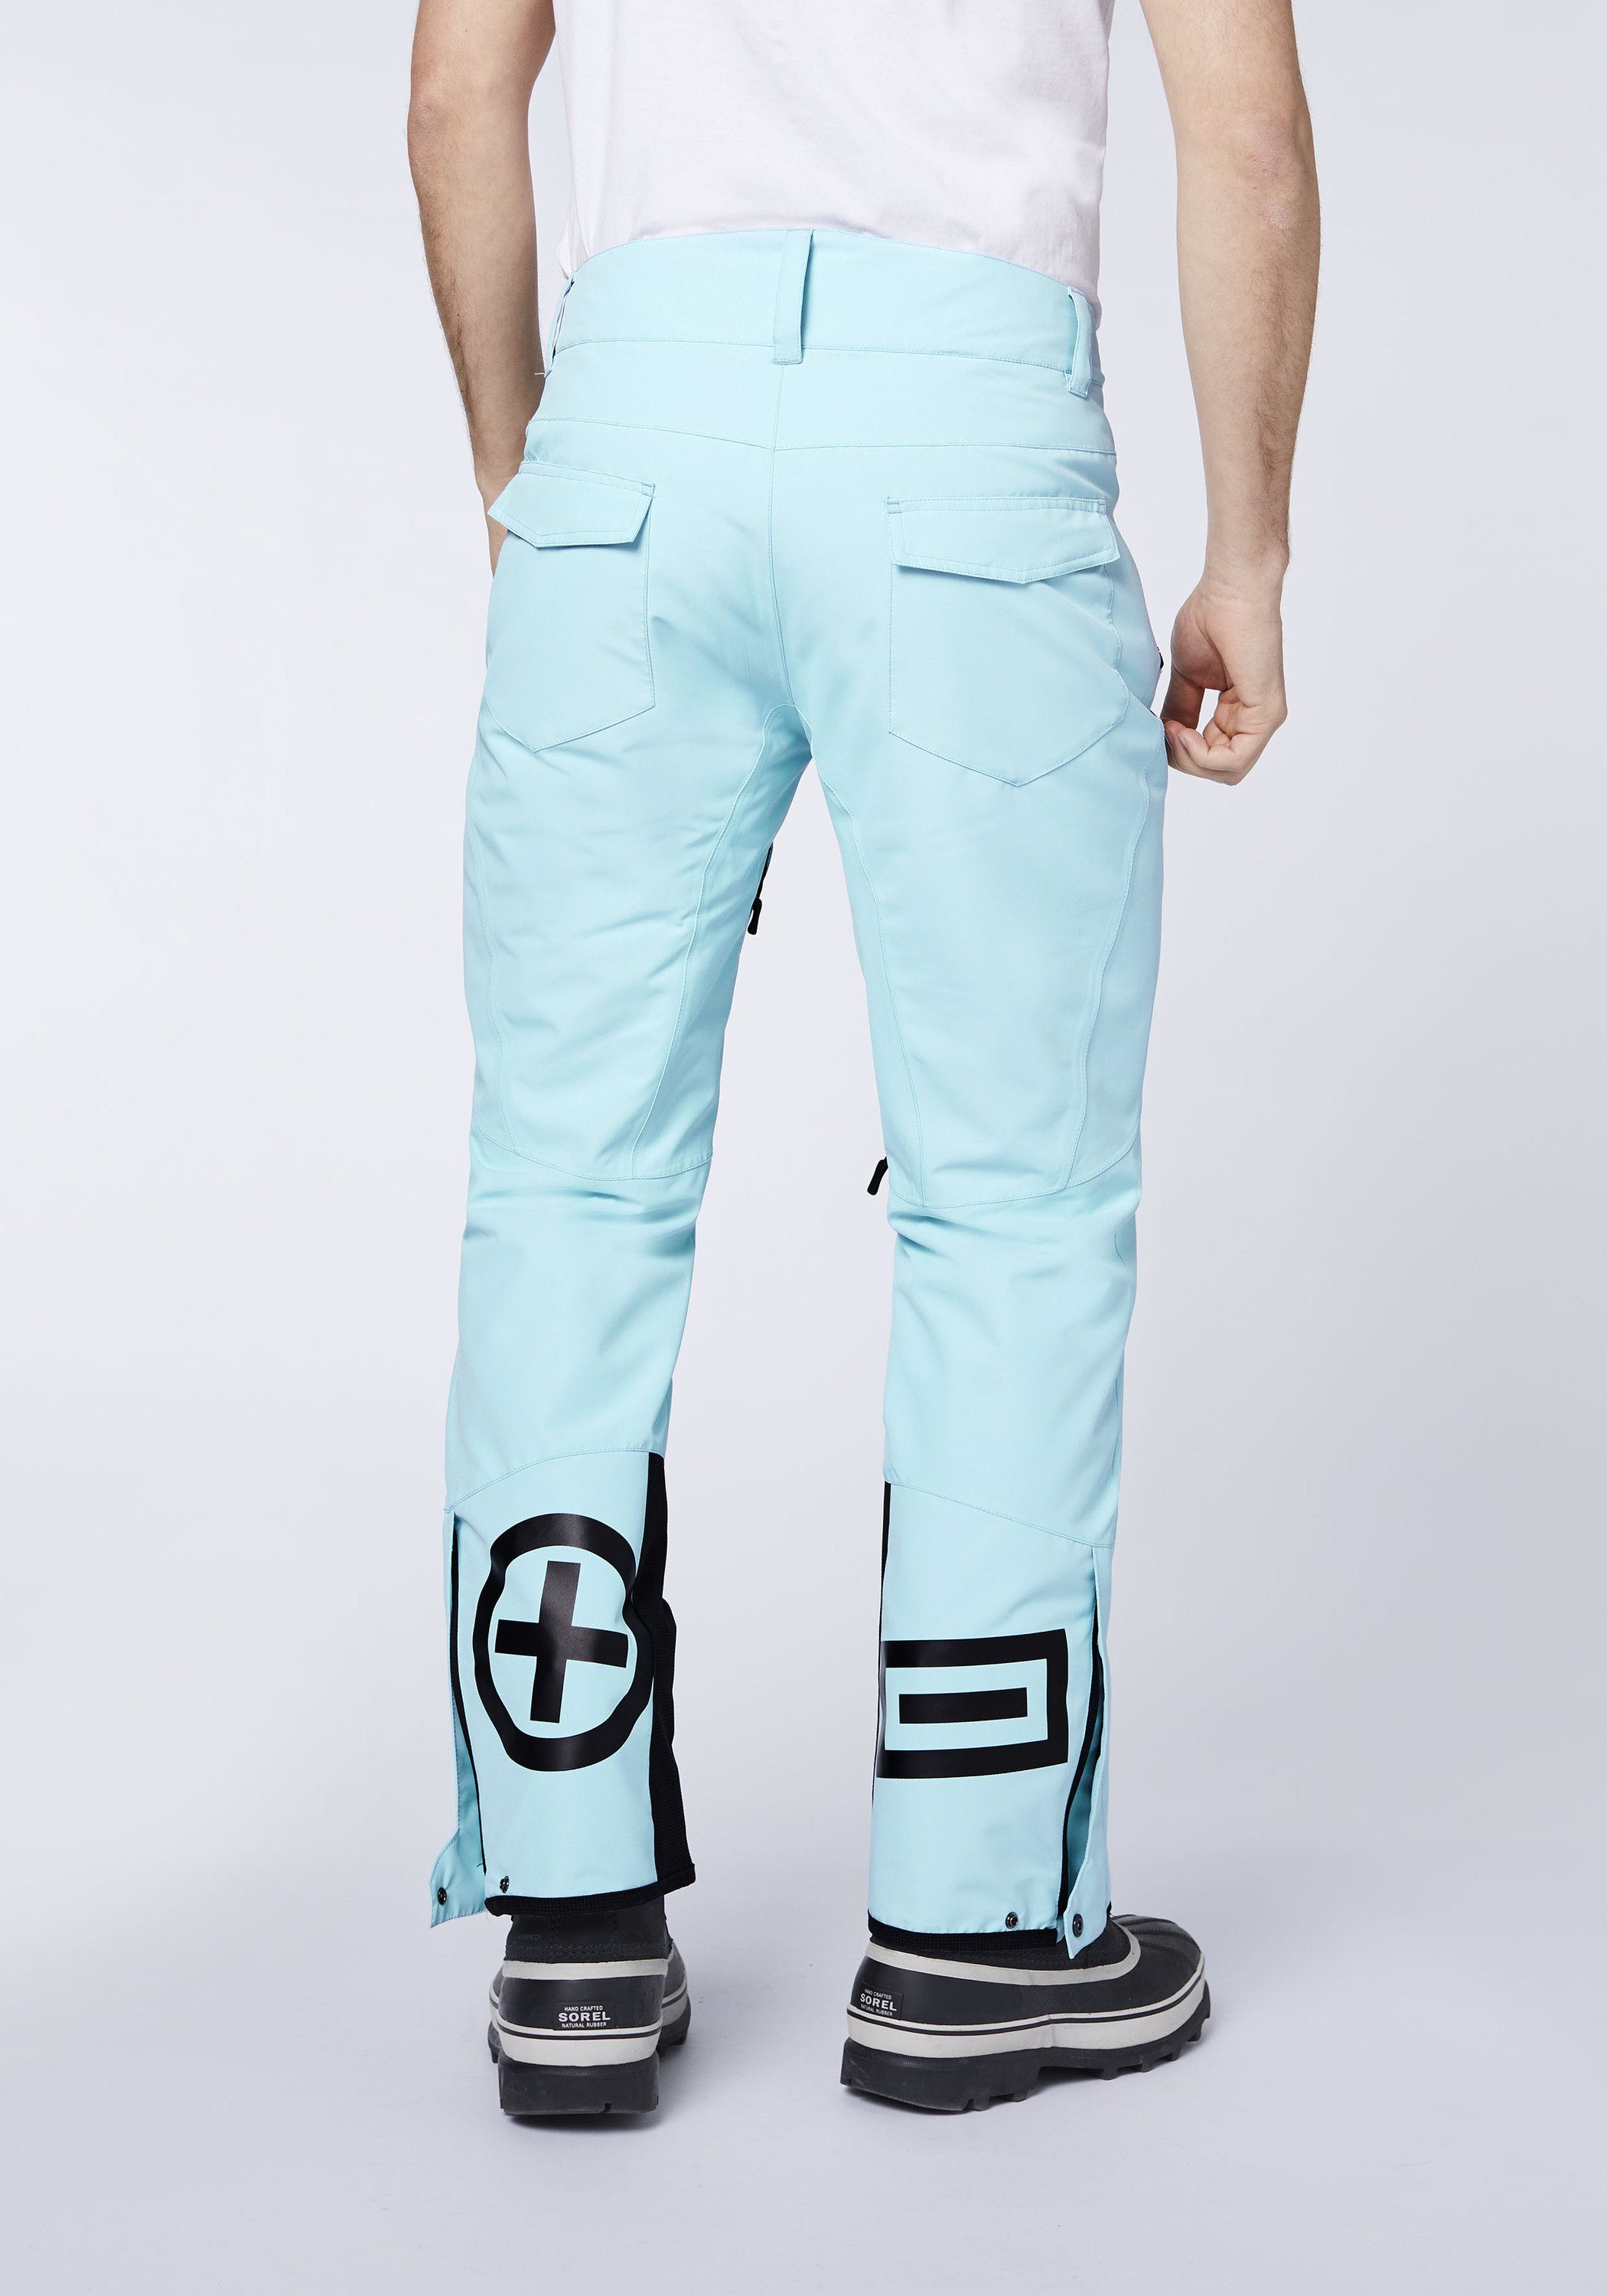 Schneefang Sporthose Blue mit Cool Skihose Chiemsee 1